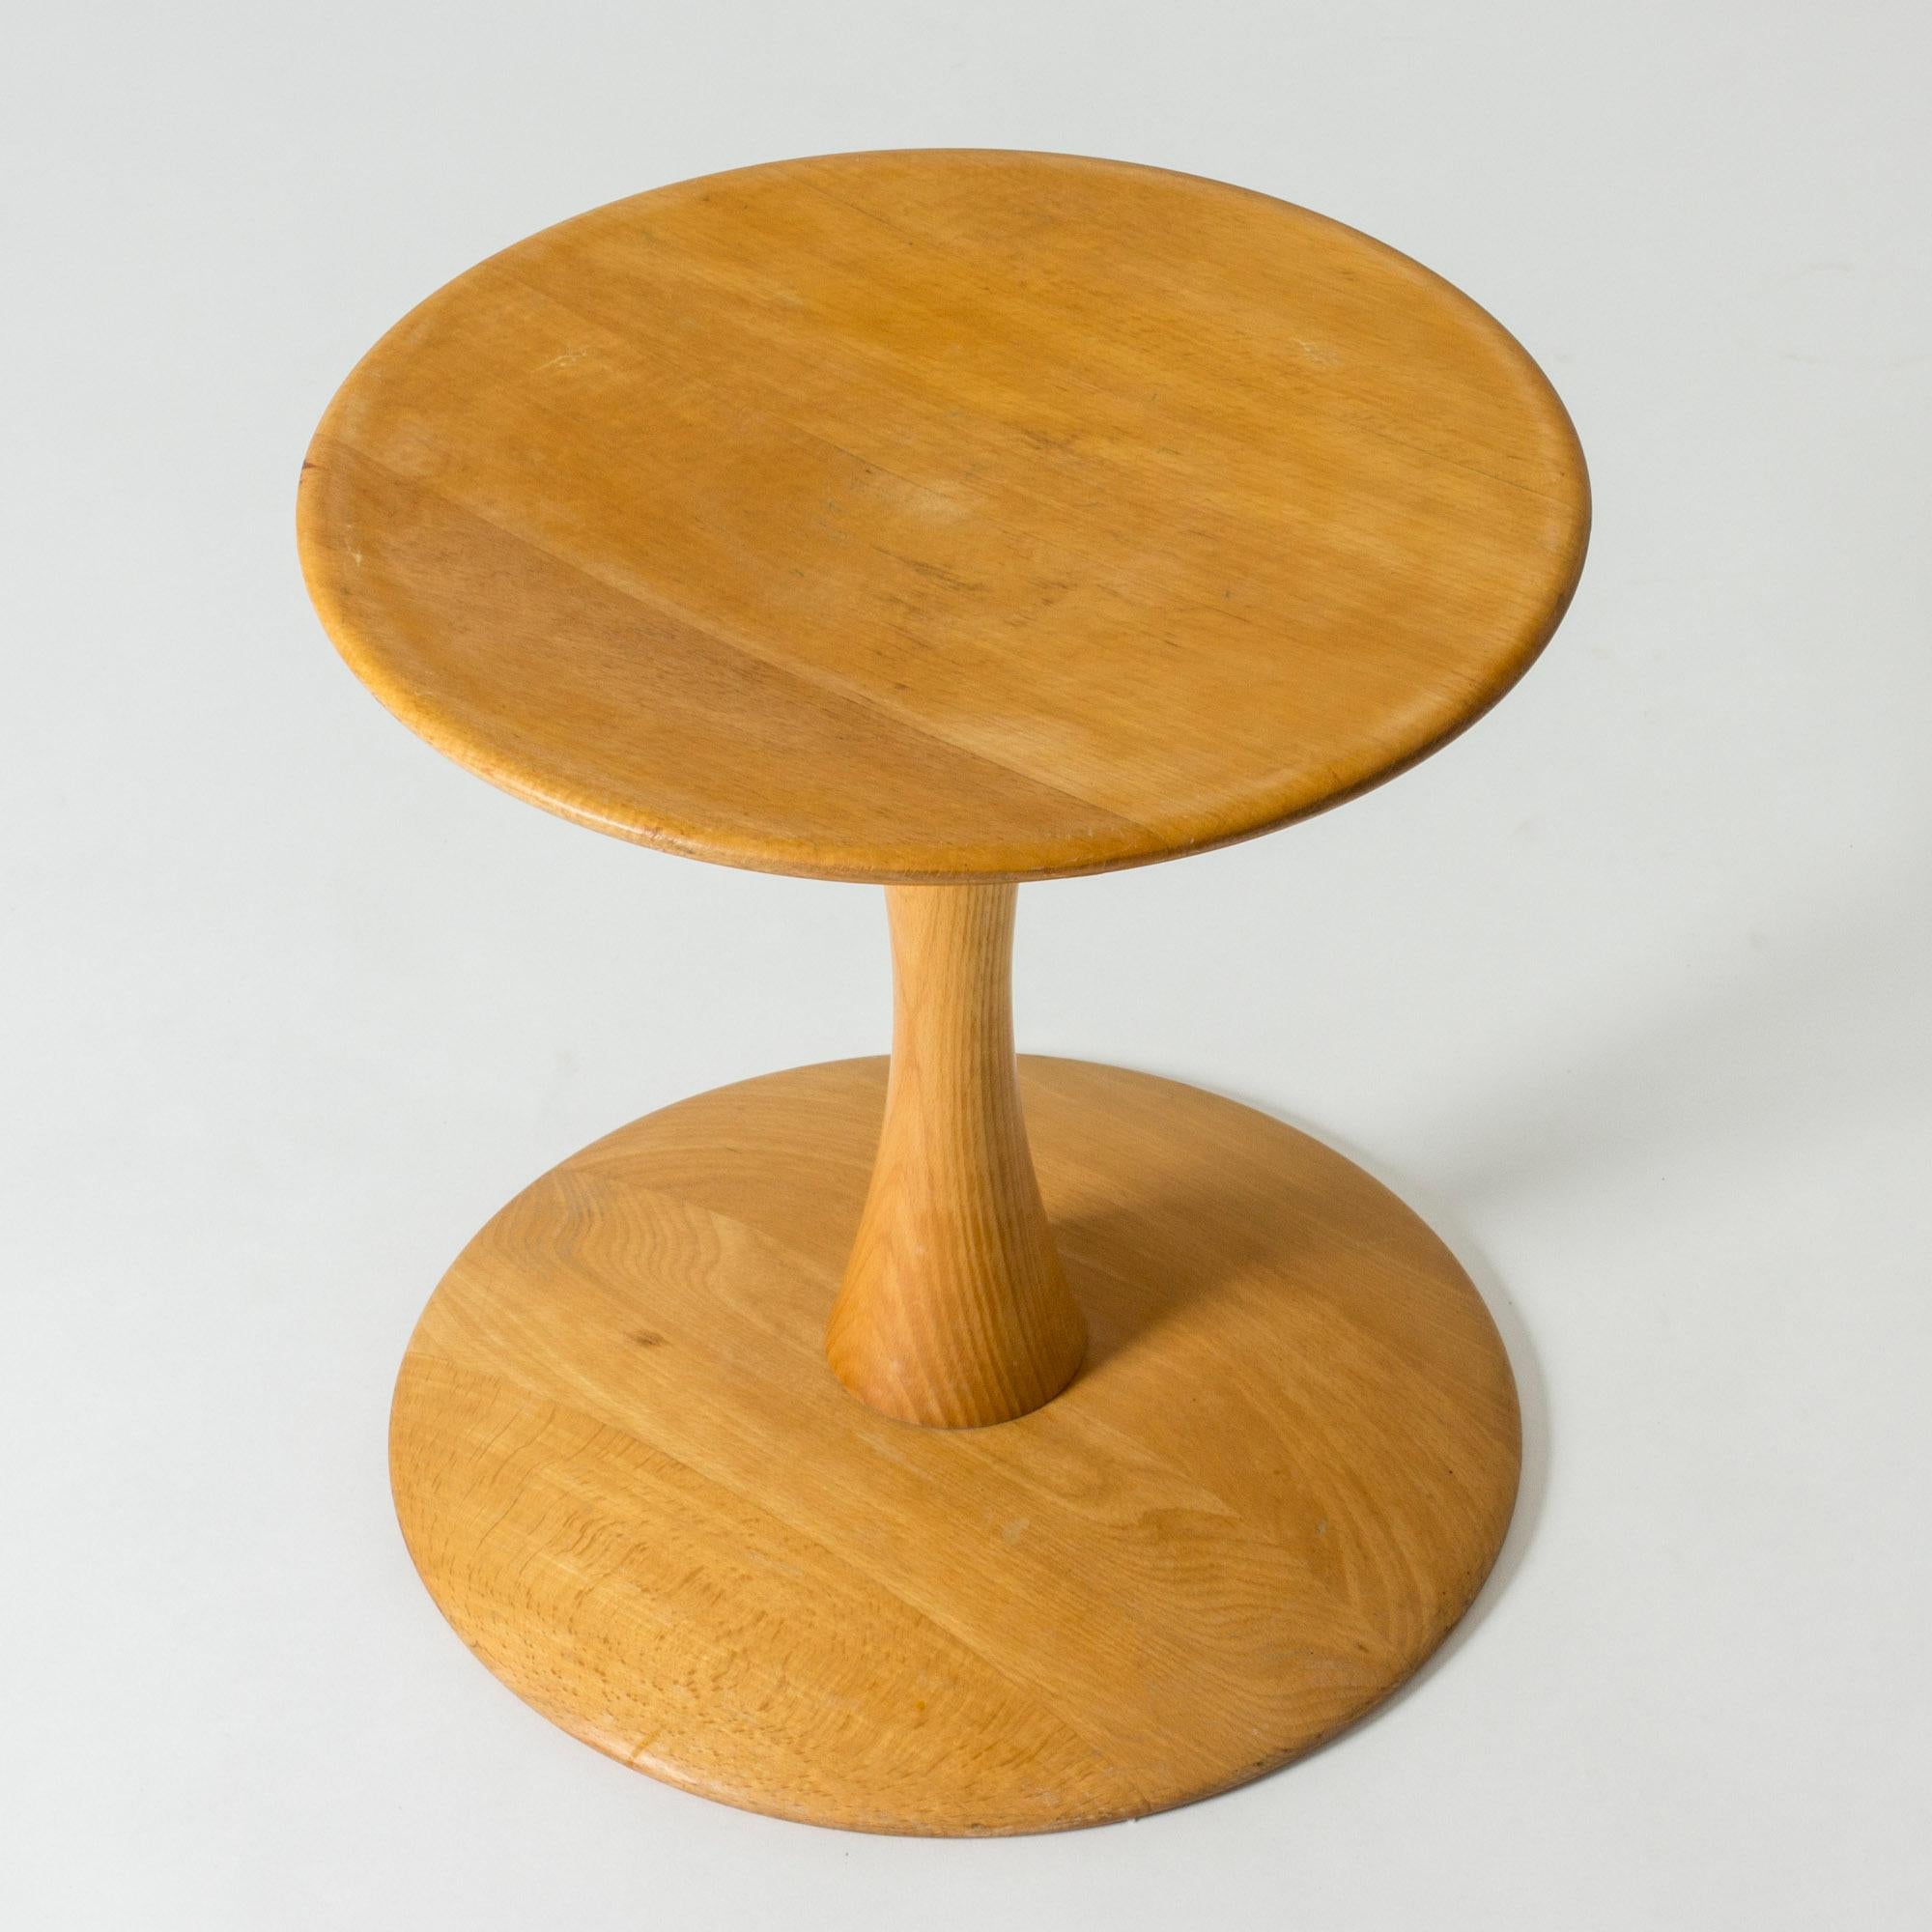 Lovely “Toad stool” or “Trisserne” stool by Nanna Ditzel. Made from beech, in a friendly graphic design. Can be used as a seat or a small side table.


The base diameter is 42 cm, while the top is 39 cm.